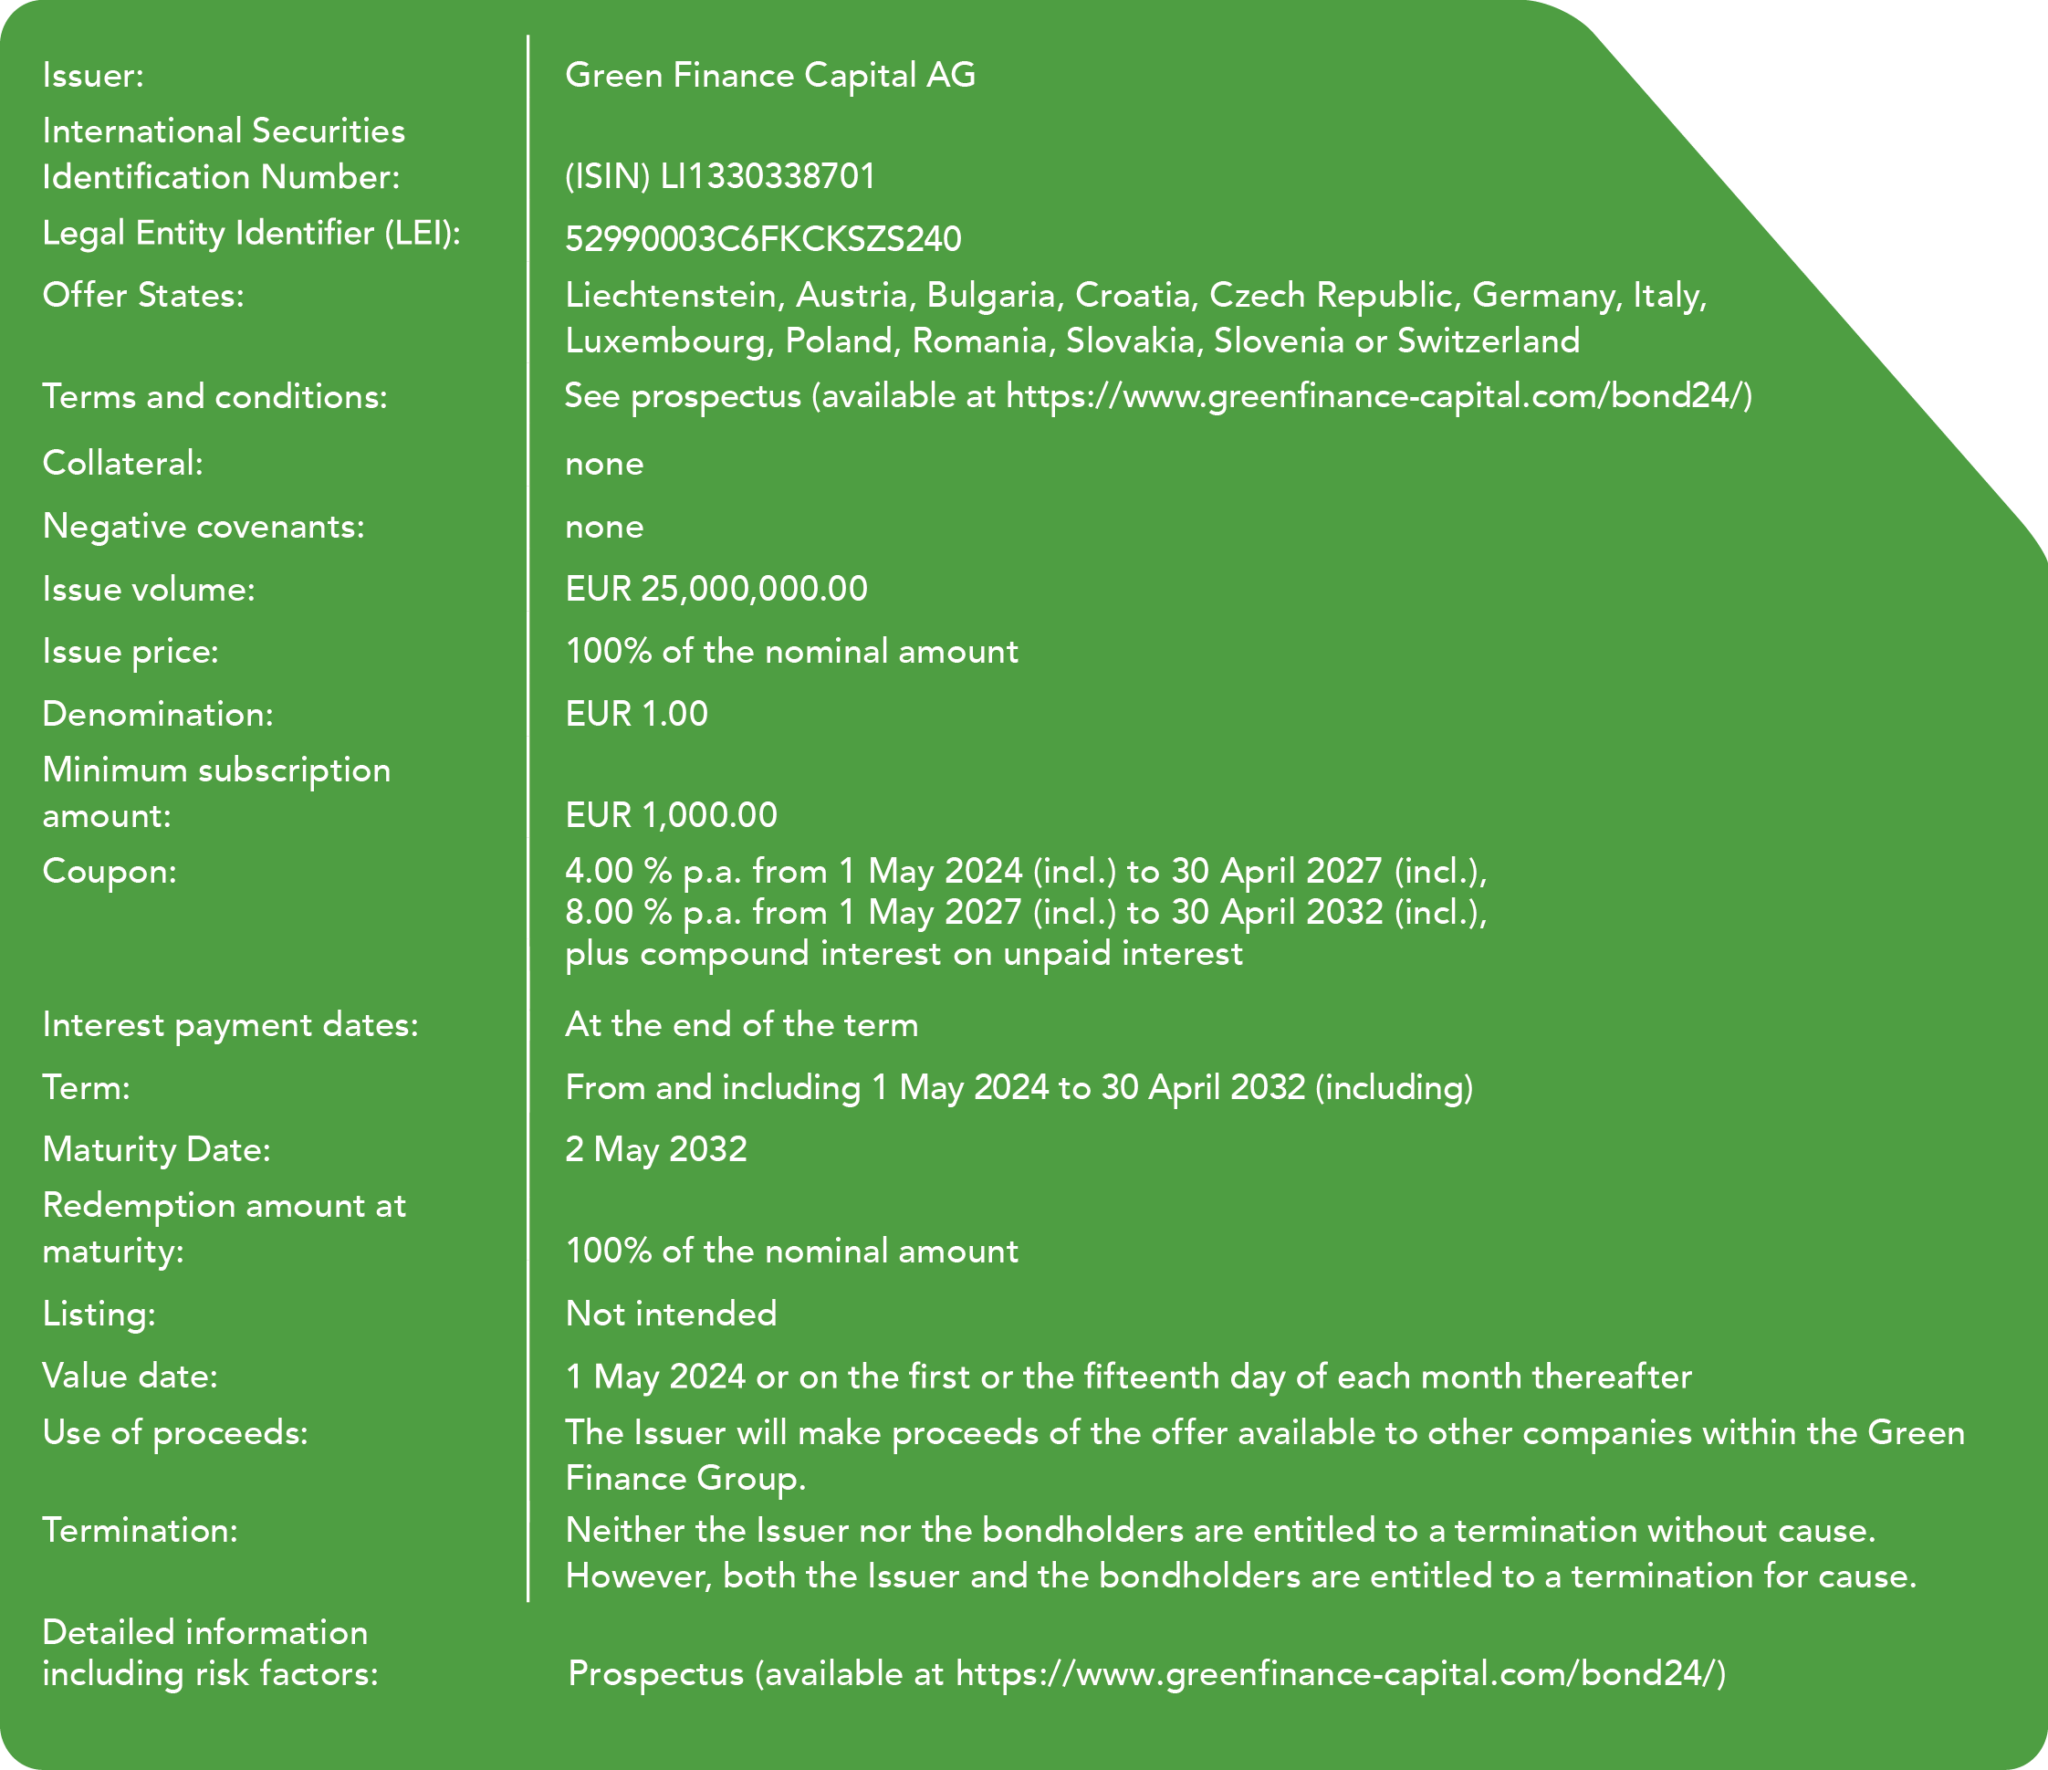 Facts about the Green Finance Capital Step up Bond 2024-2032 - more information can be found in the description of the image.